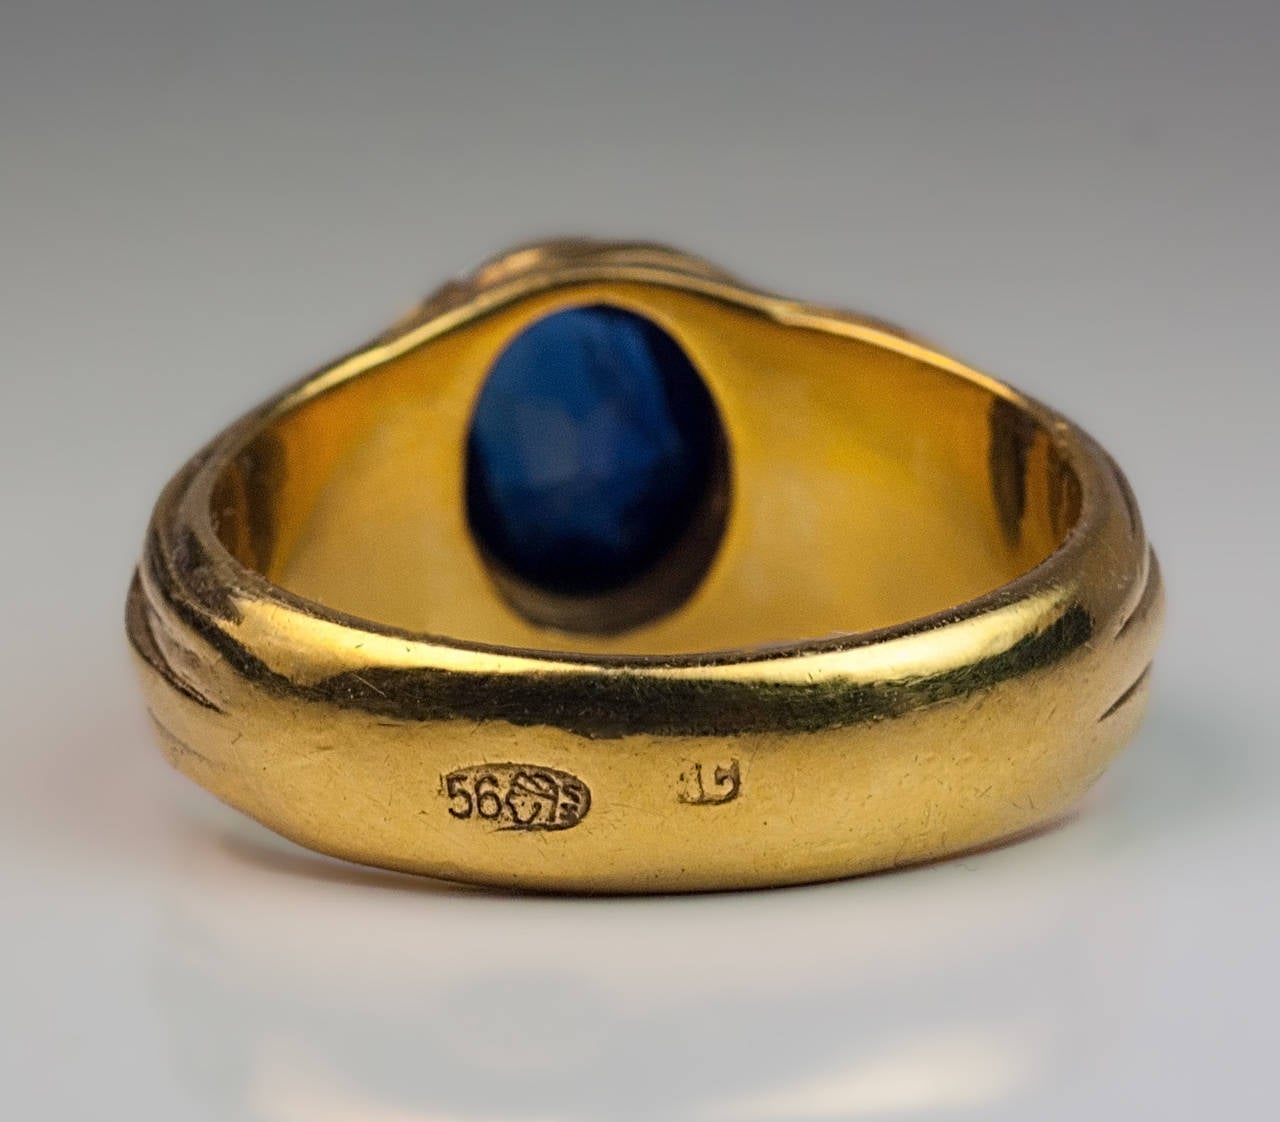 Russian, made in Moscow between 1899 and 1908

14K yellow gold ring centered with a bezel-set oval blue sapphire (7.35 x 6 x 3.5 mm, approximately 1.28 ct) flanked by Art Nouveau leaves

marked with 56 zolotnik standard and maker's